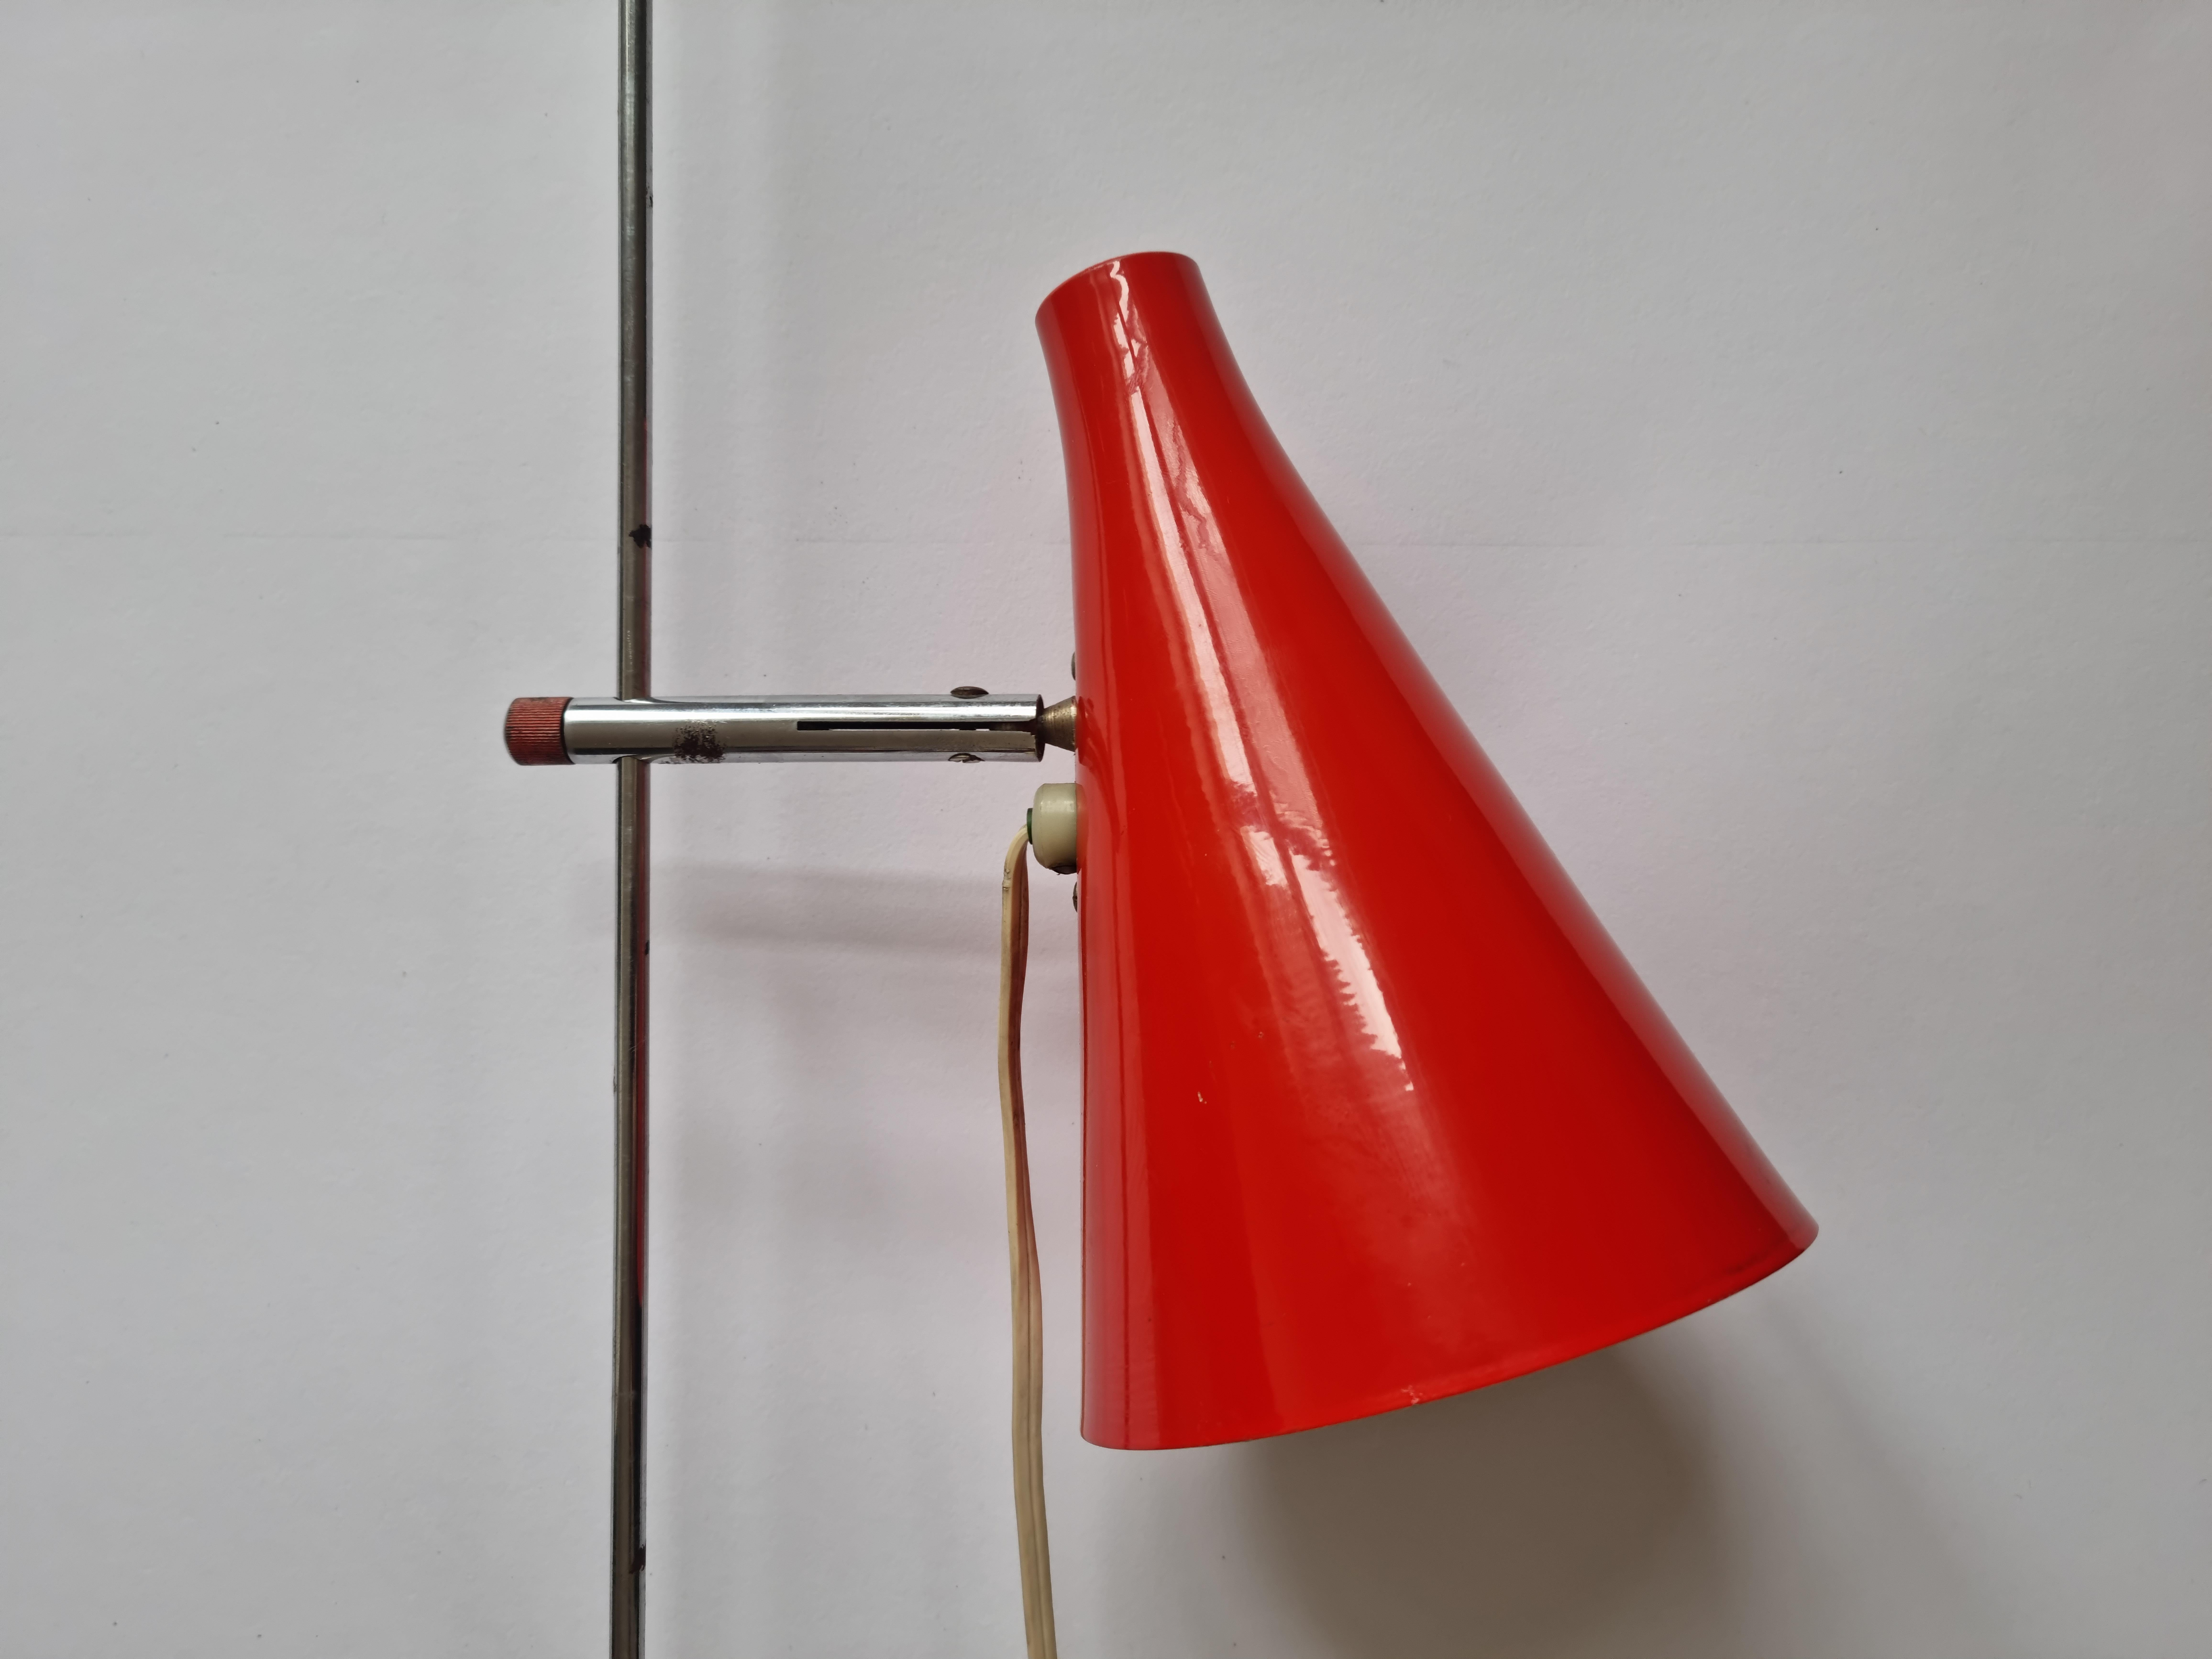 Lacquered Midcentury Wall Lamp Lidokov, Josef Hurka, 1960s For Sale